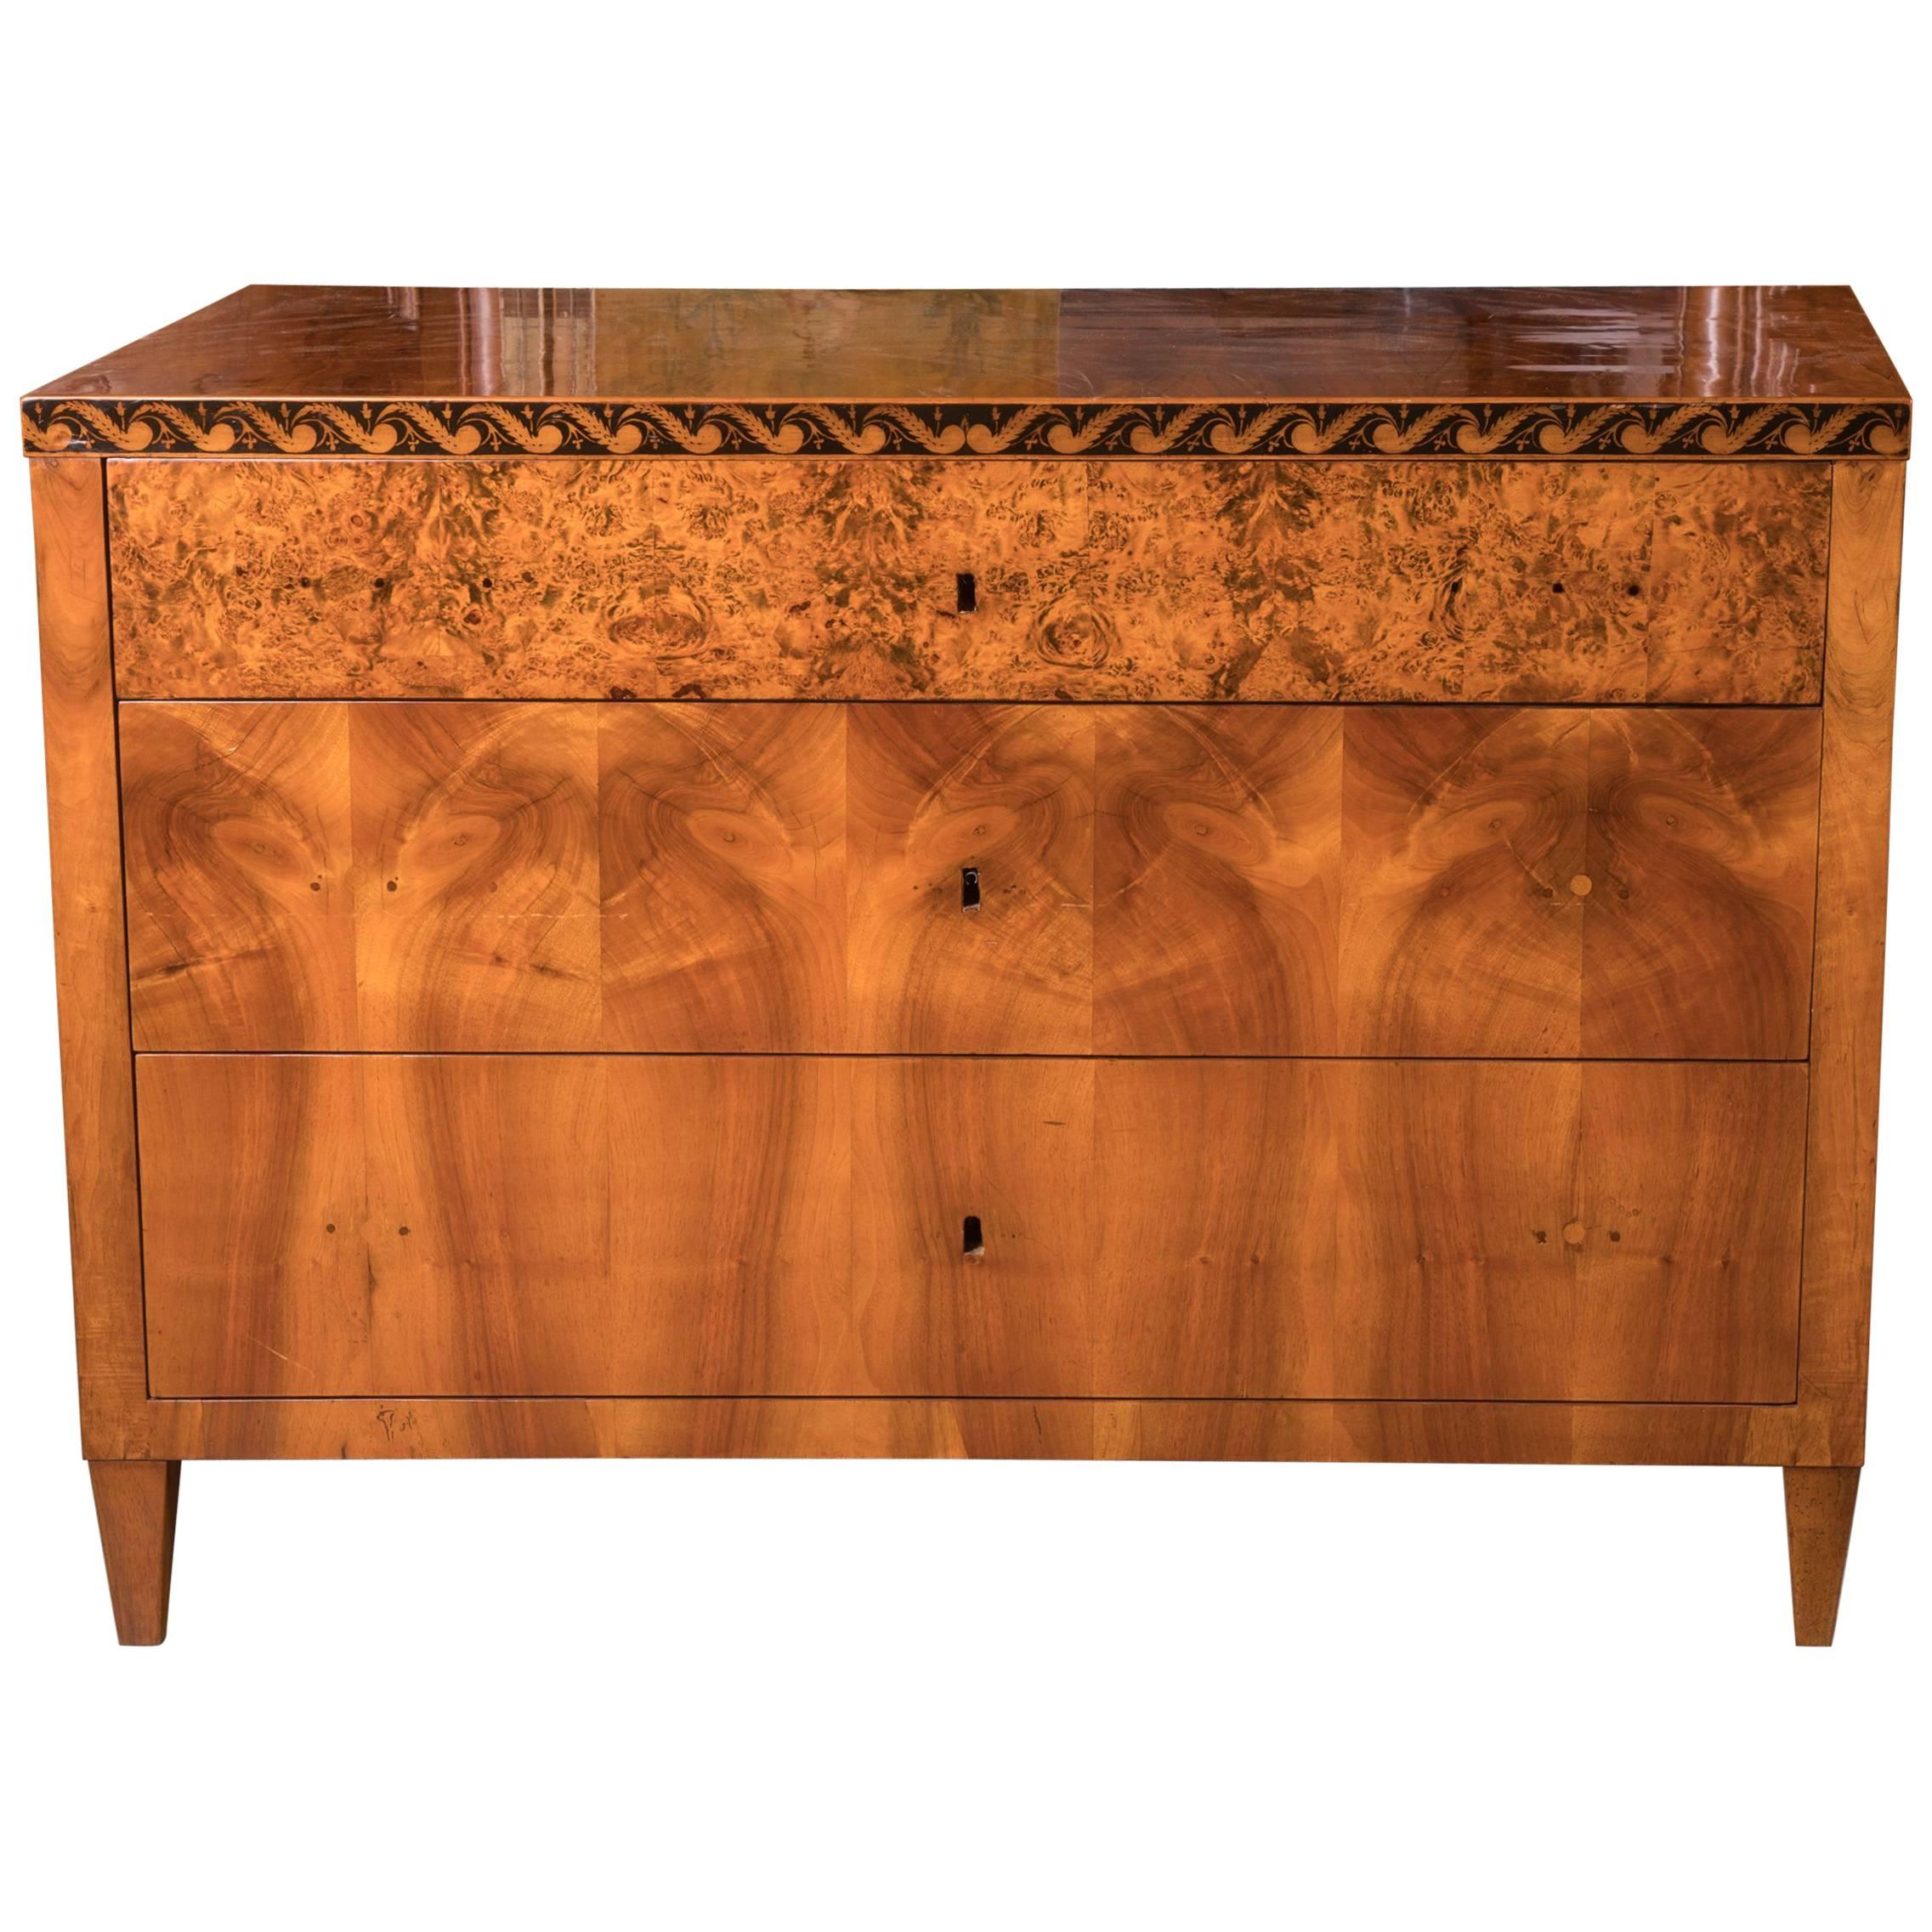 Beautiful Early 19th Century Crotched Maple Biedermeier Commode